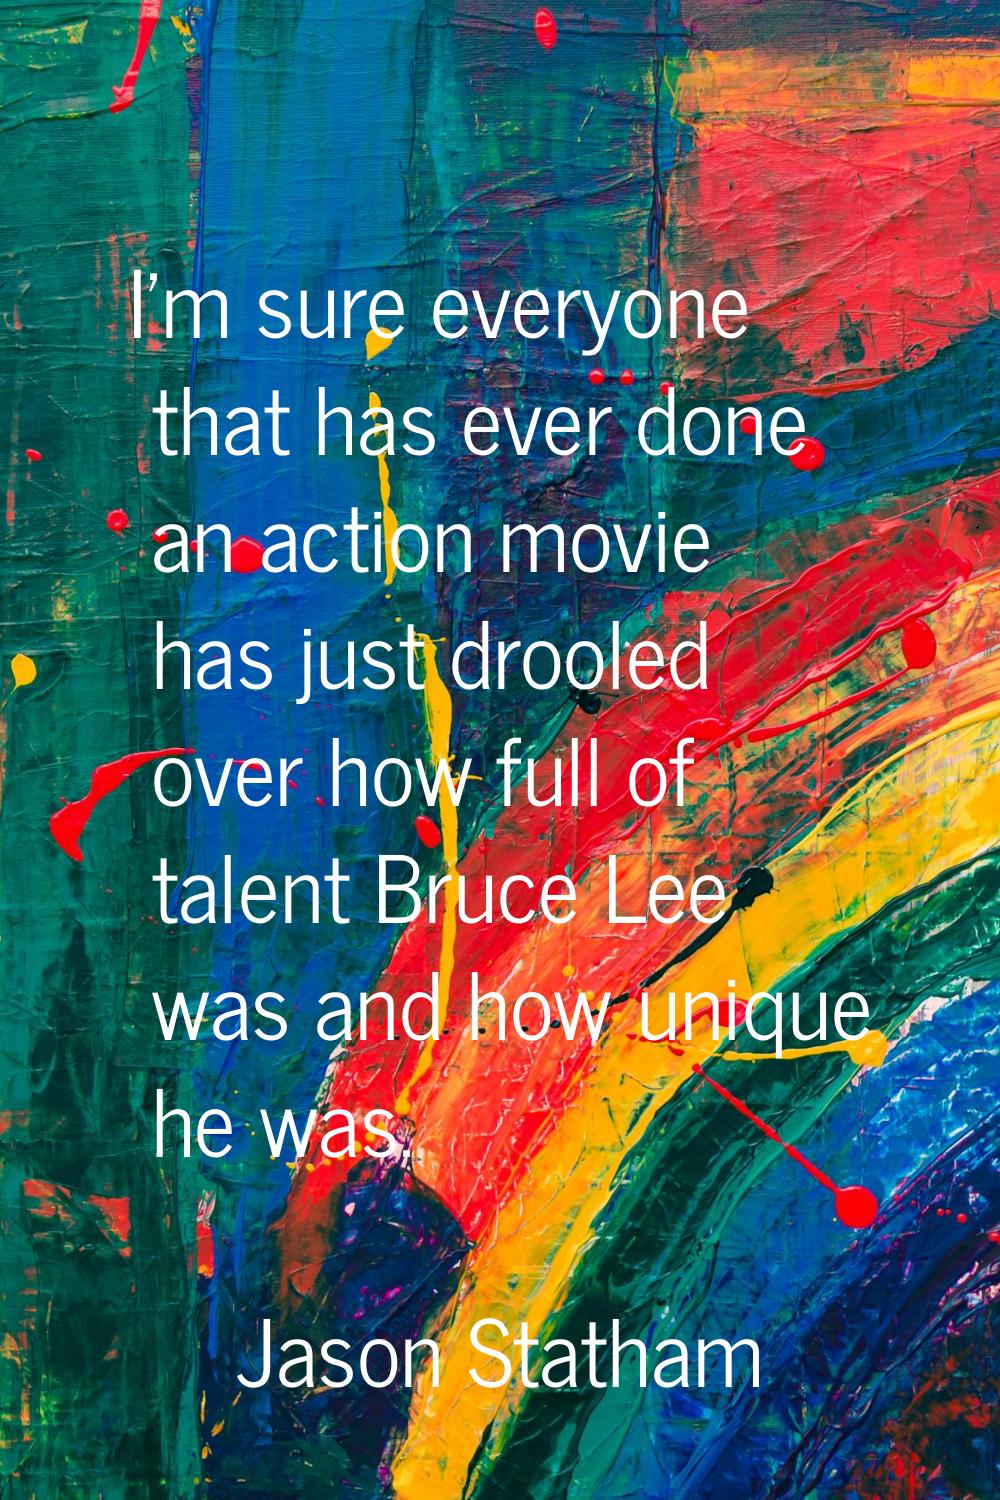 I'm sure everyone that has ever done an action movie has just drooled over how full of talent Bruce